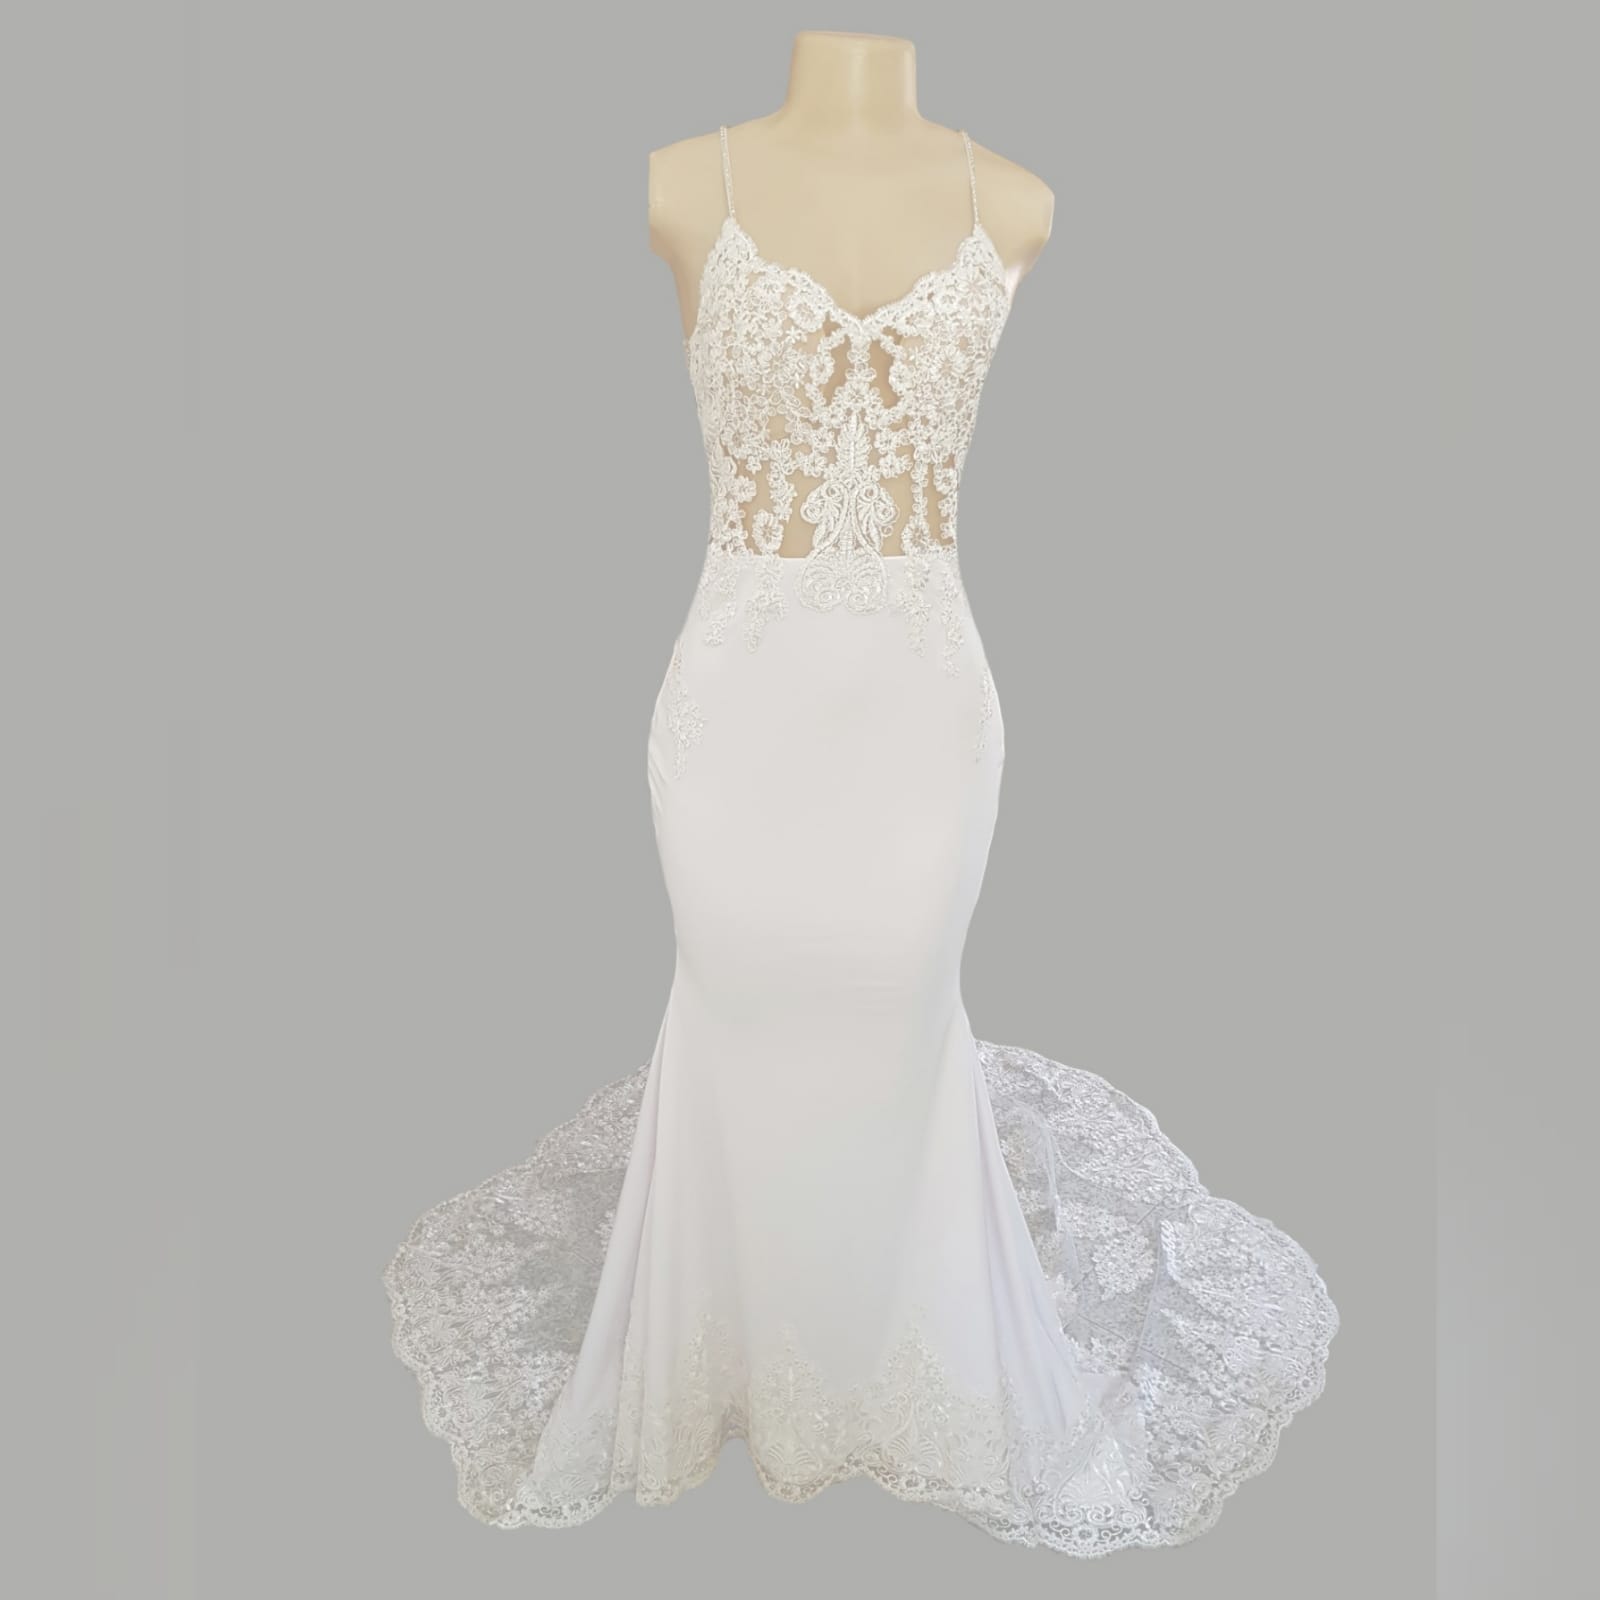 White lace mermaid wedding dress with lace train 12 white lace mermaid wedding dress, lace bodice with a v neckline, low open back and thin shoulder straps detailed with diamante. Lace from the waist down, creating a long sheer lace train. With a train hookup and a matching garter.